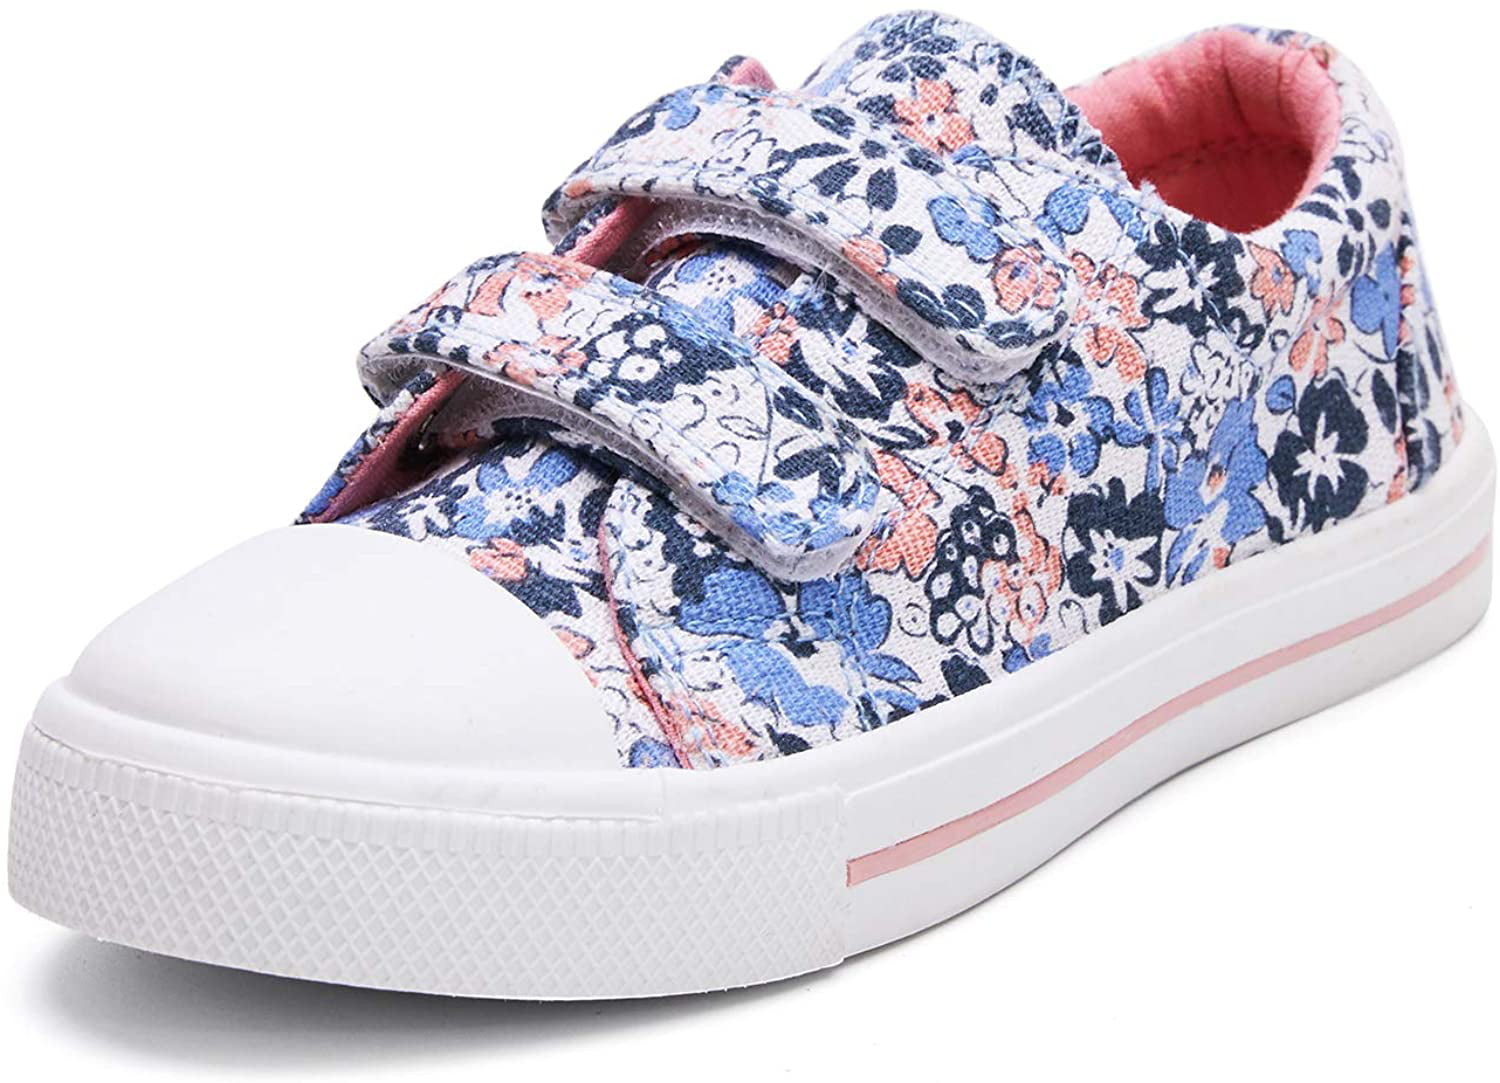 MAIHT Boys Girls Shoes Butterfly Pattern Lace-Up Low Top White Canvas Sneakers 